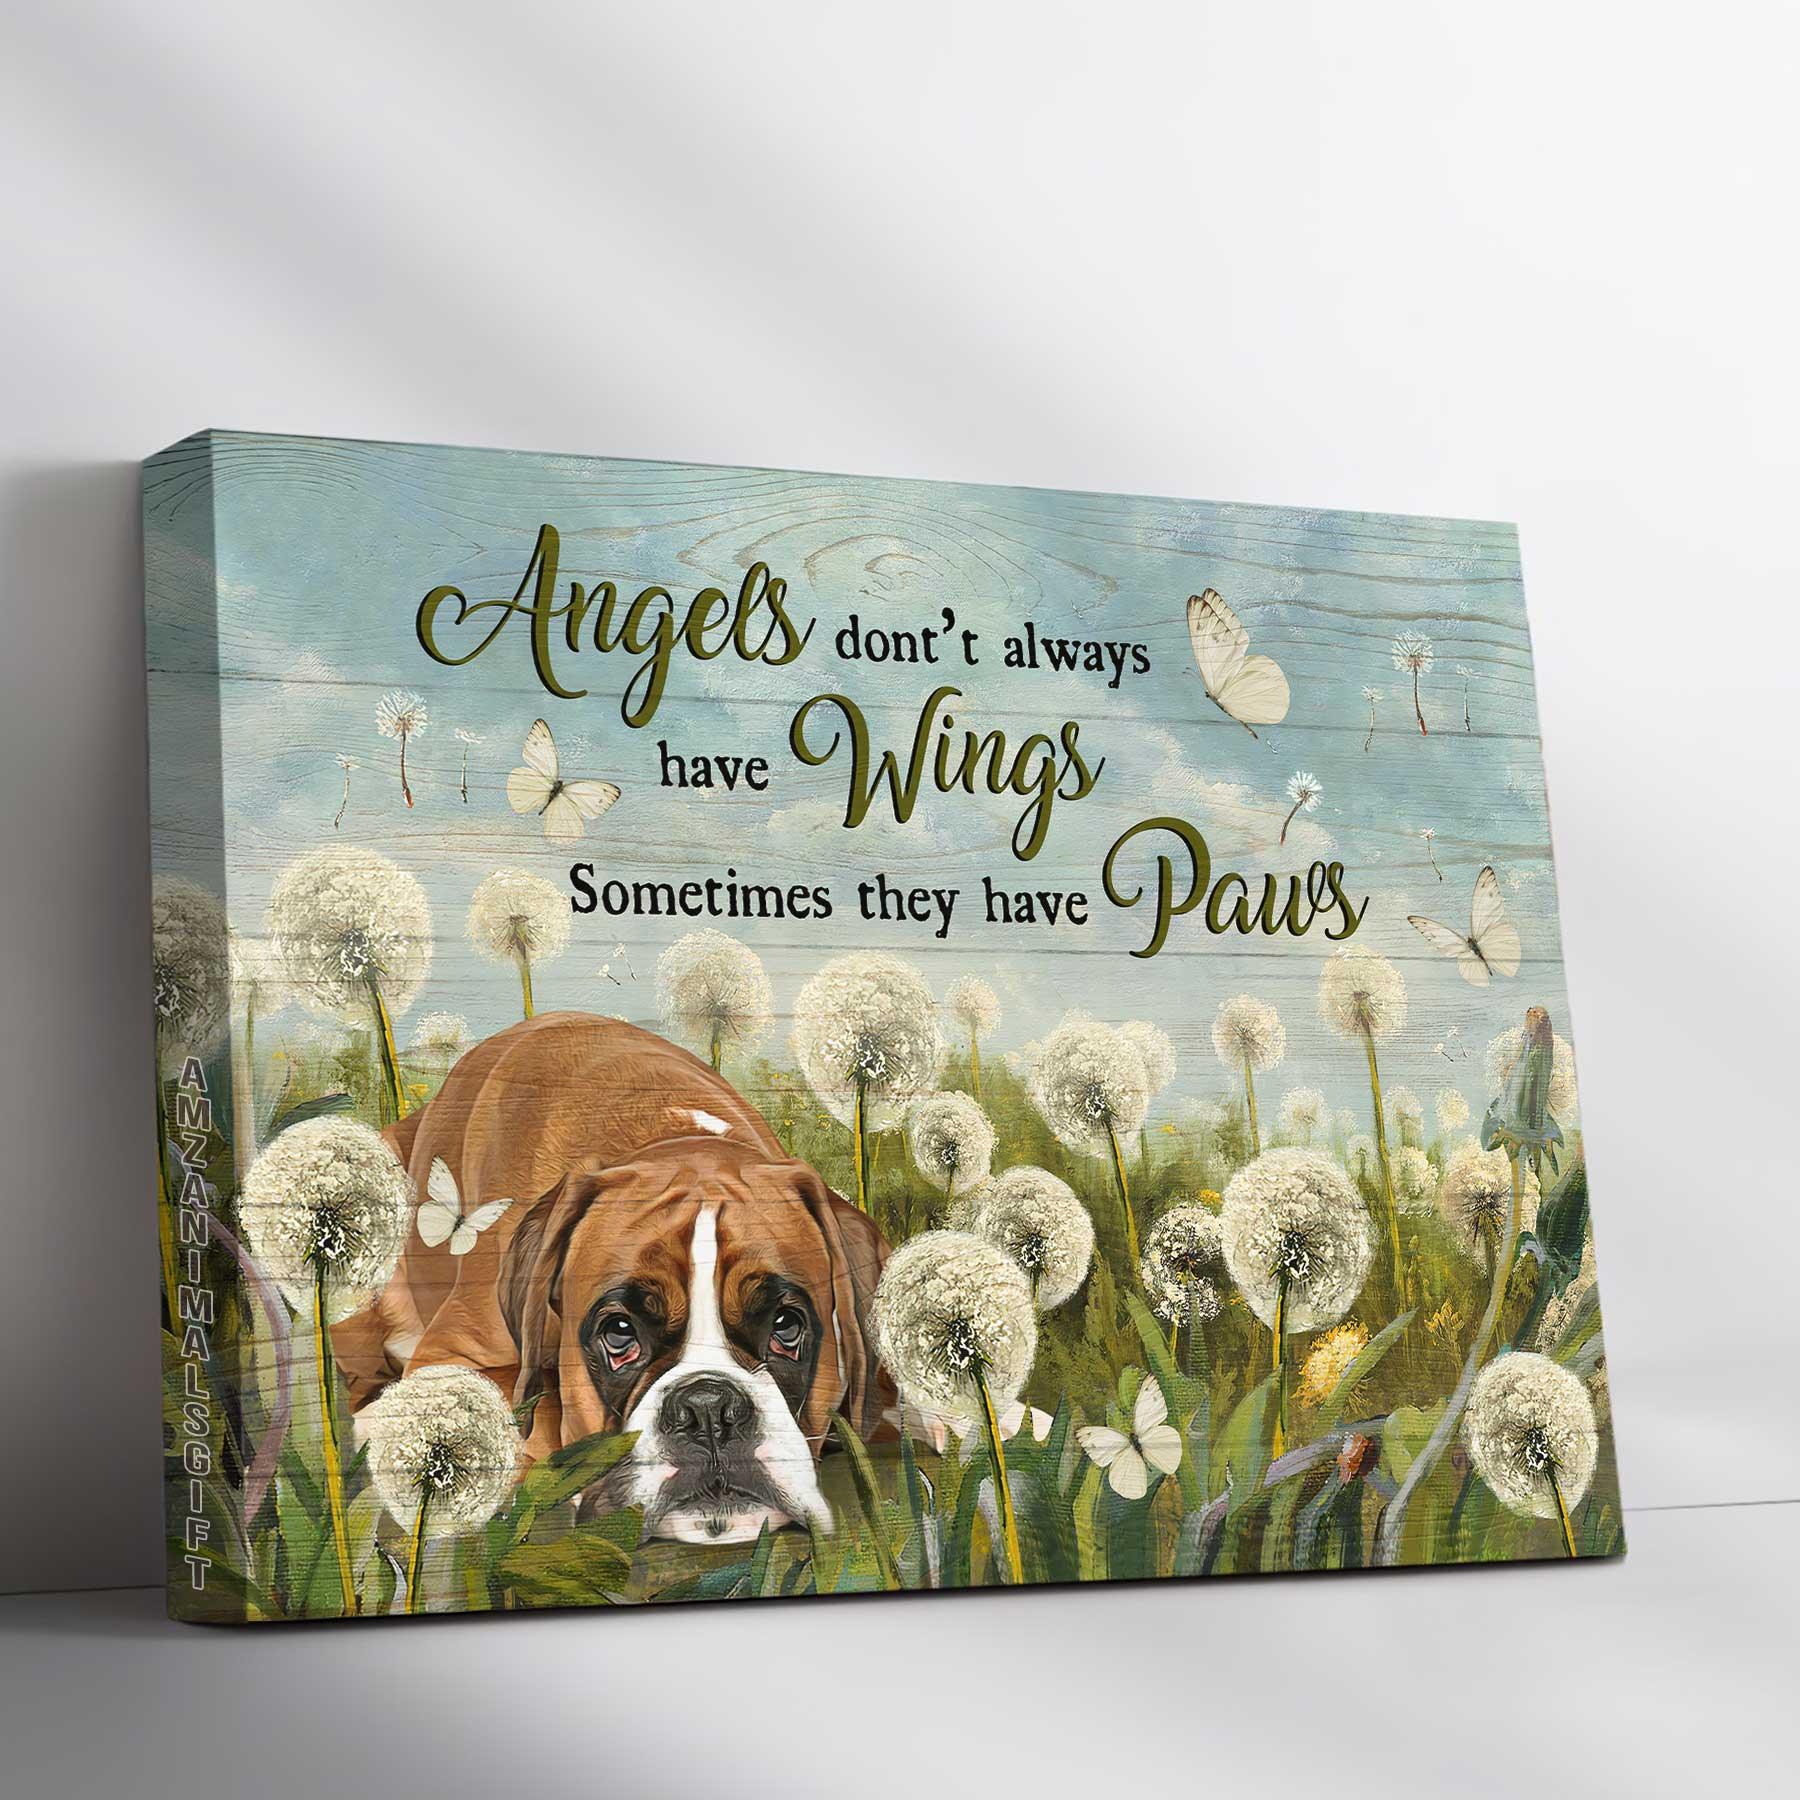 Boxer Premium Wrapped Landscape Canvas - Boxer Painting, Dandelion Field, Angels Don't Always Have Wings - Gift For Boxer Lovers - Amzanimalsgift